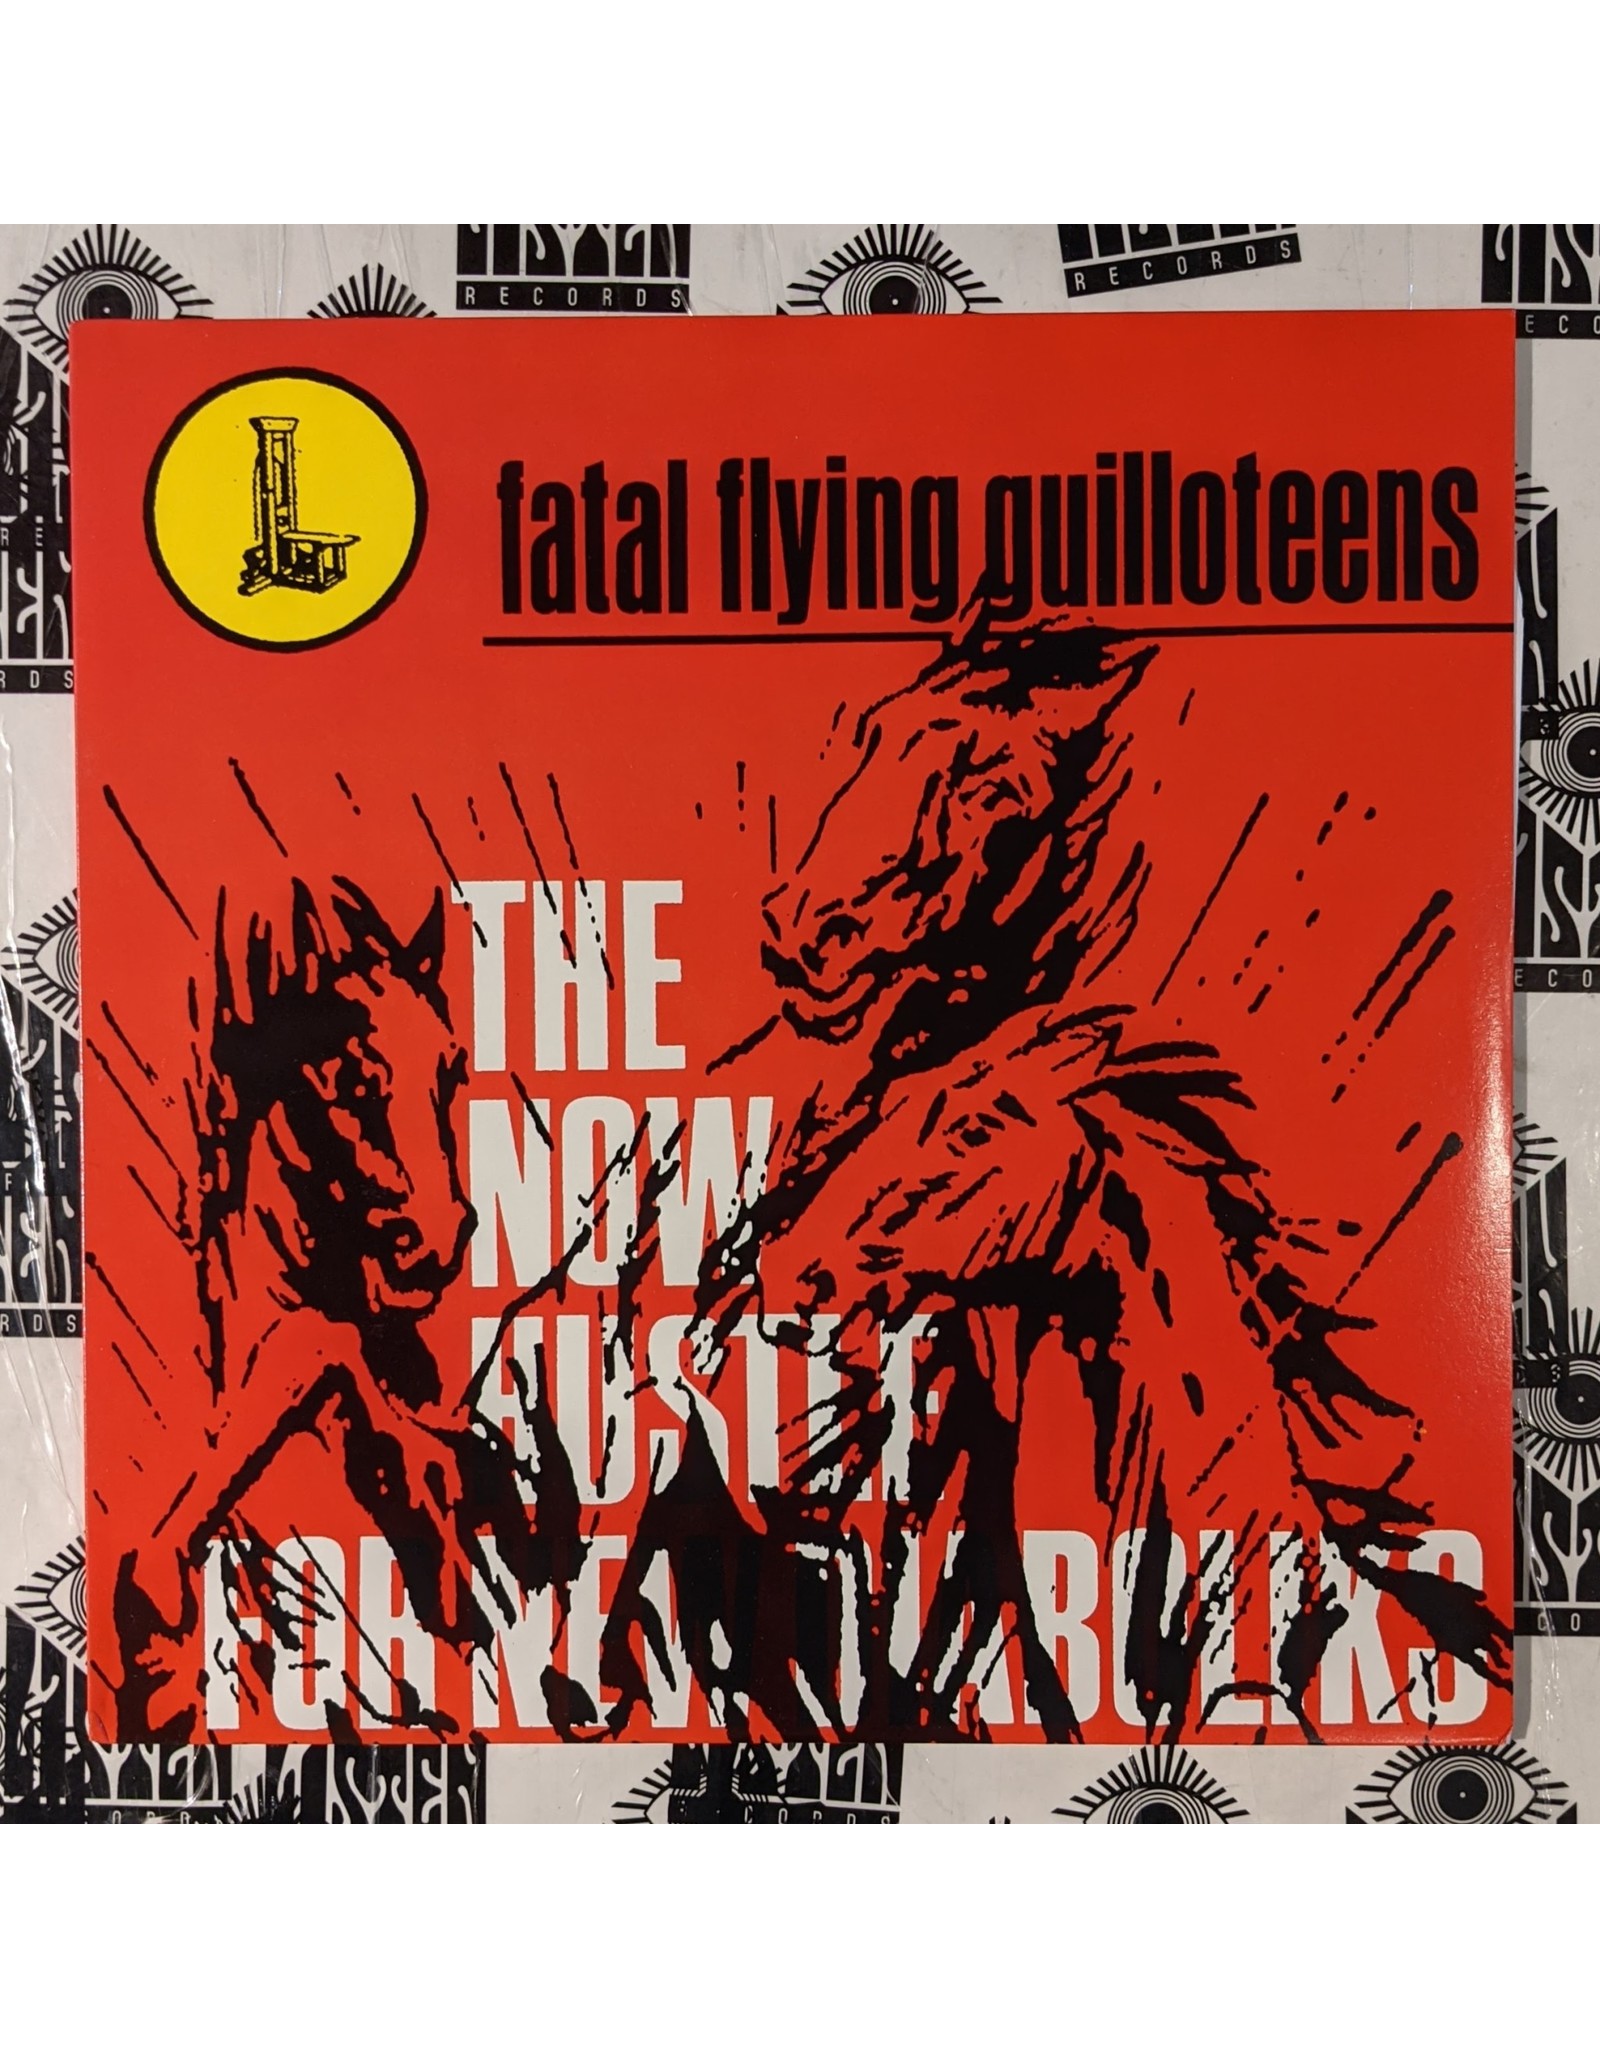 USED: Fatal Flying Guilloteens: The Now Hustle for New Diaboliks LP